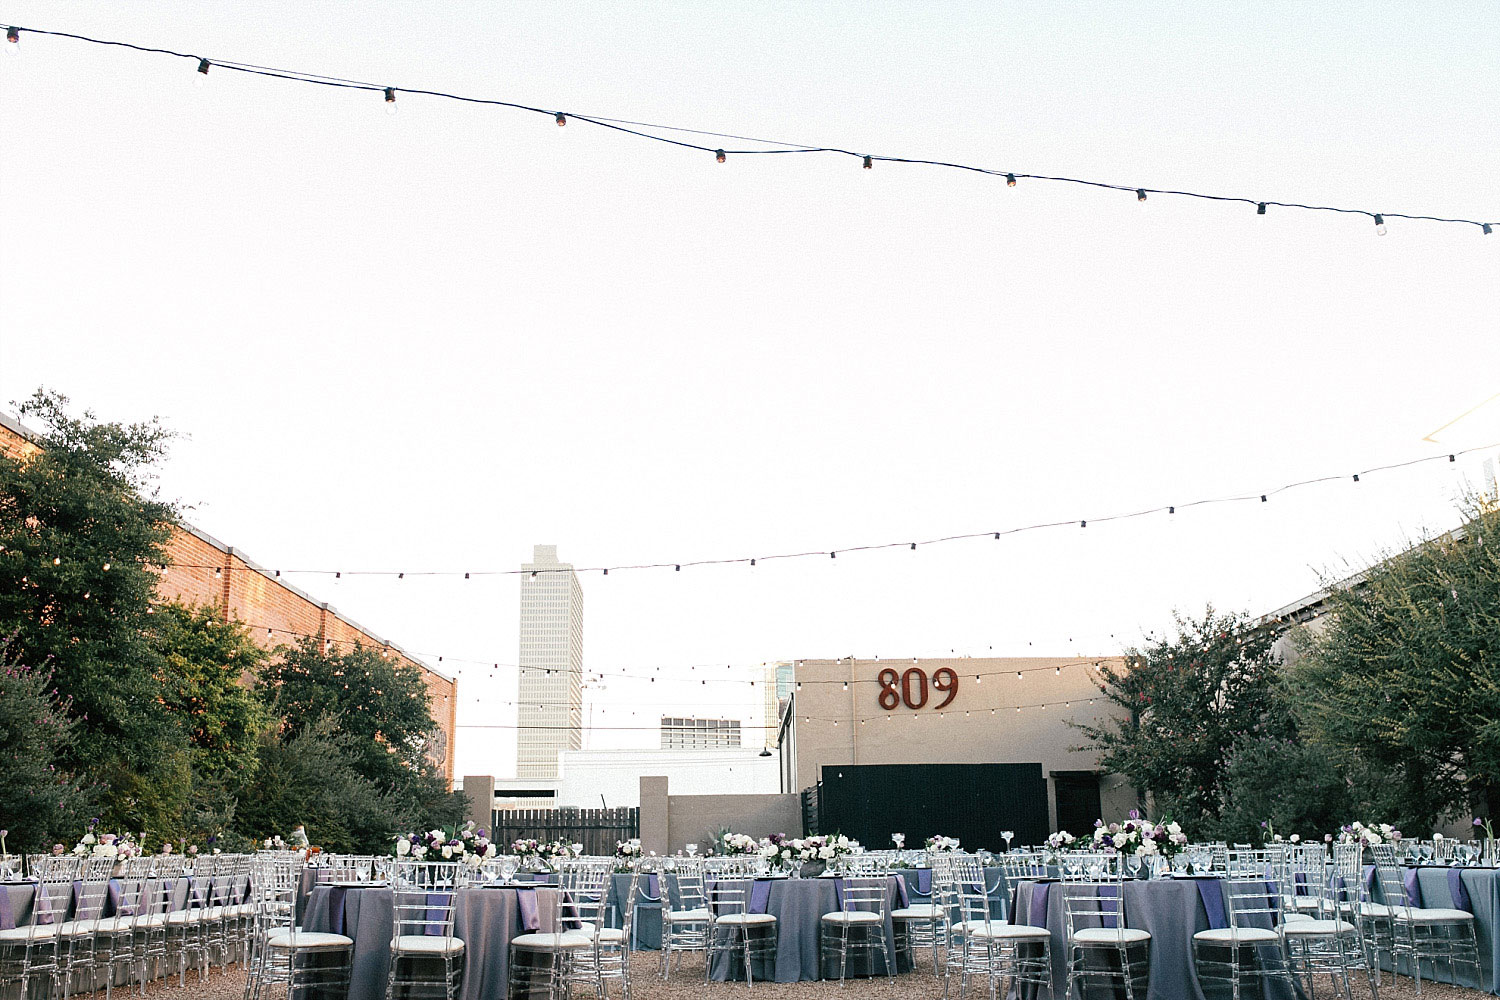 809 at Vickery wedding reception in courtyard